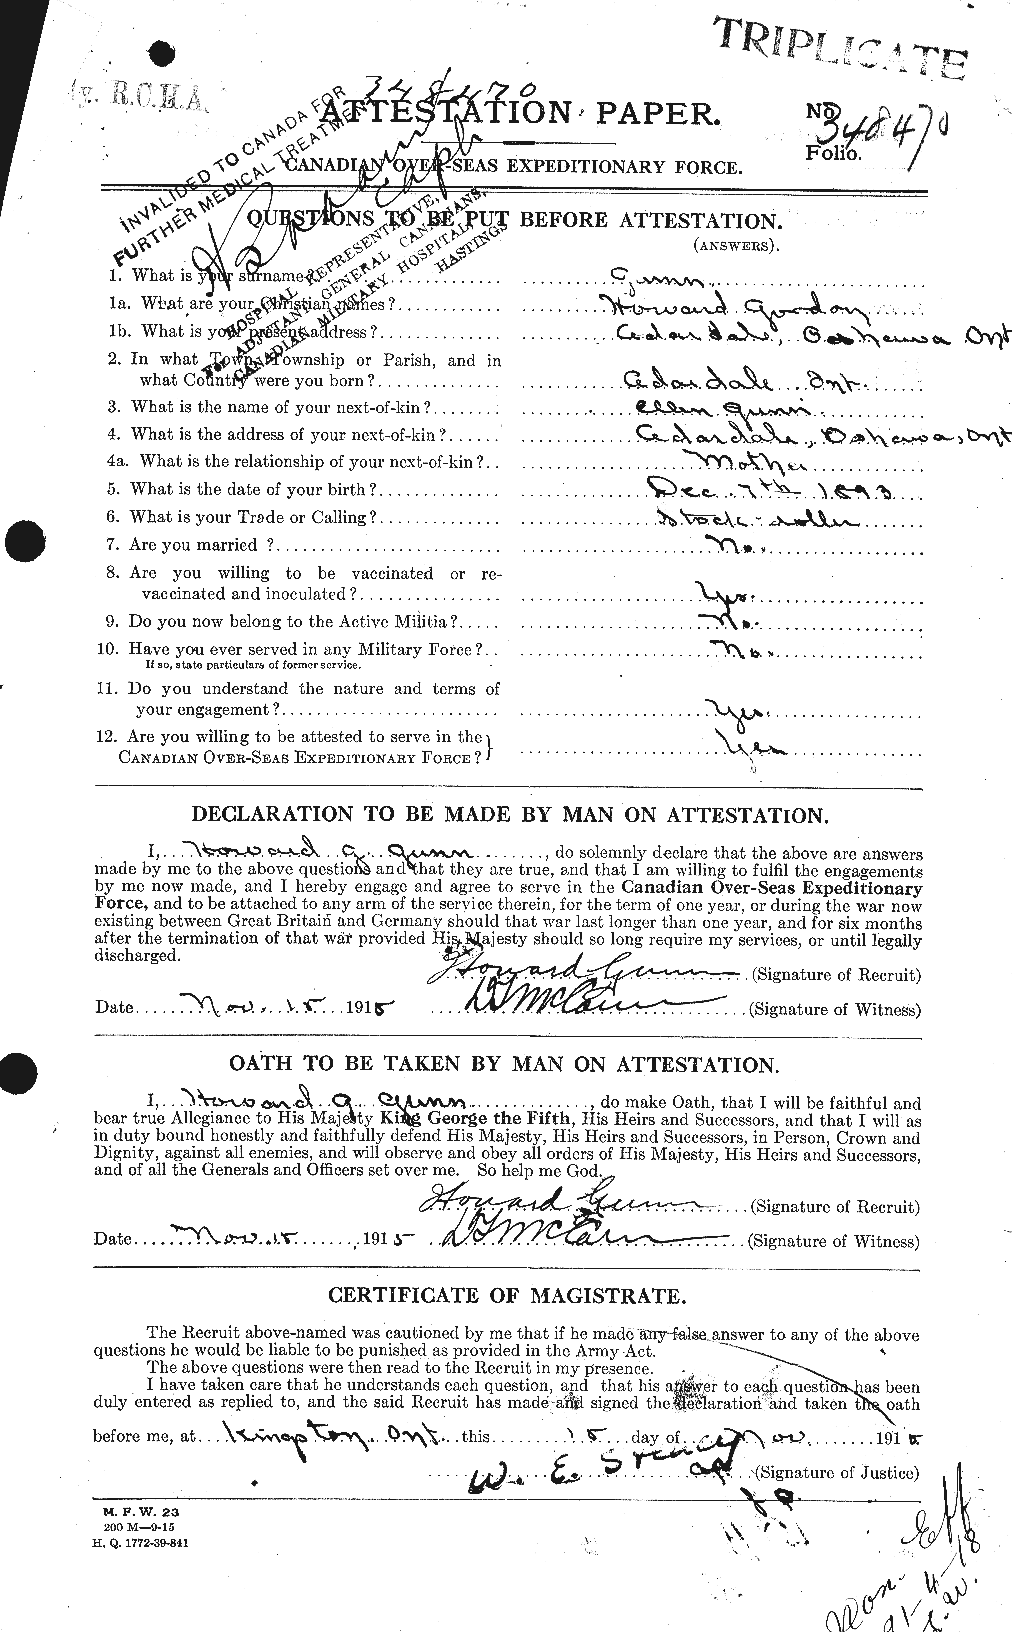 Personnel Records of the First World War - CEF 369260a